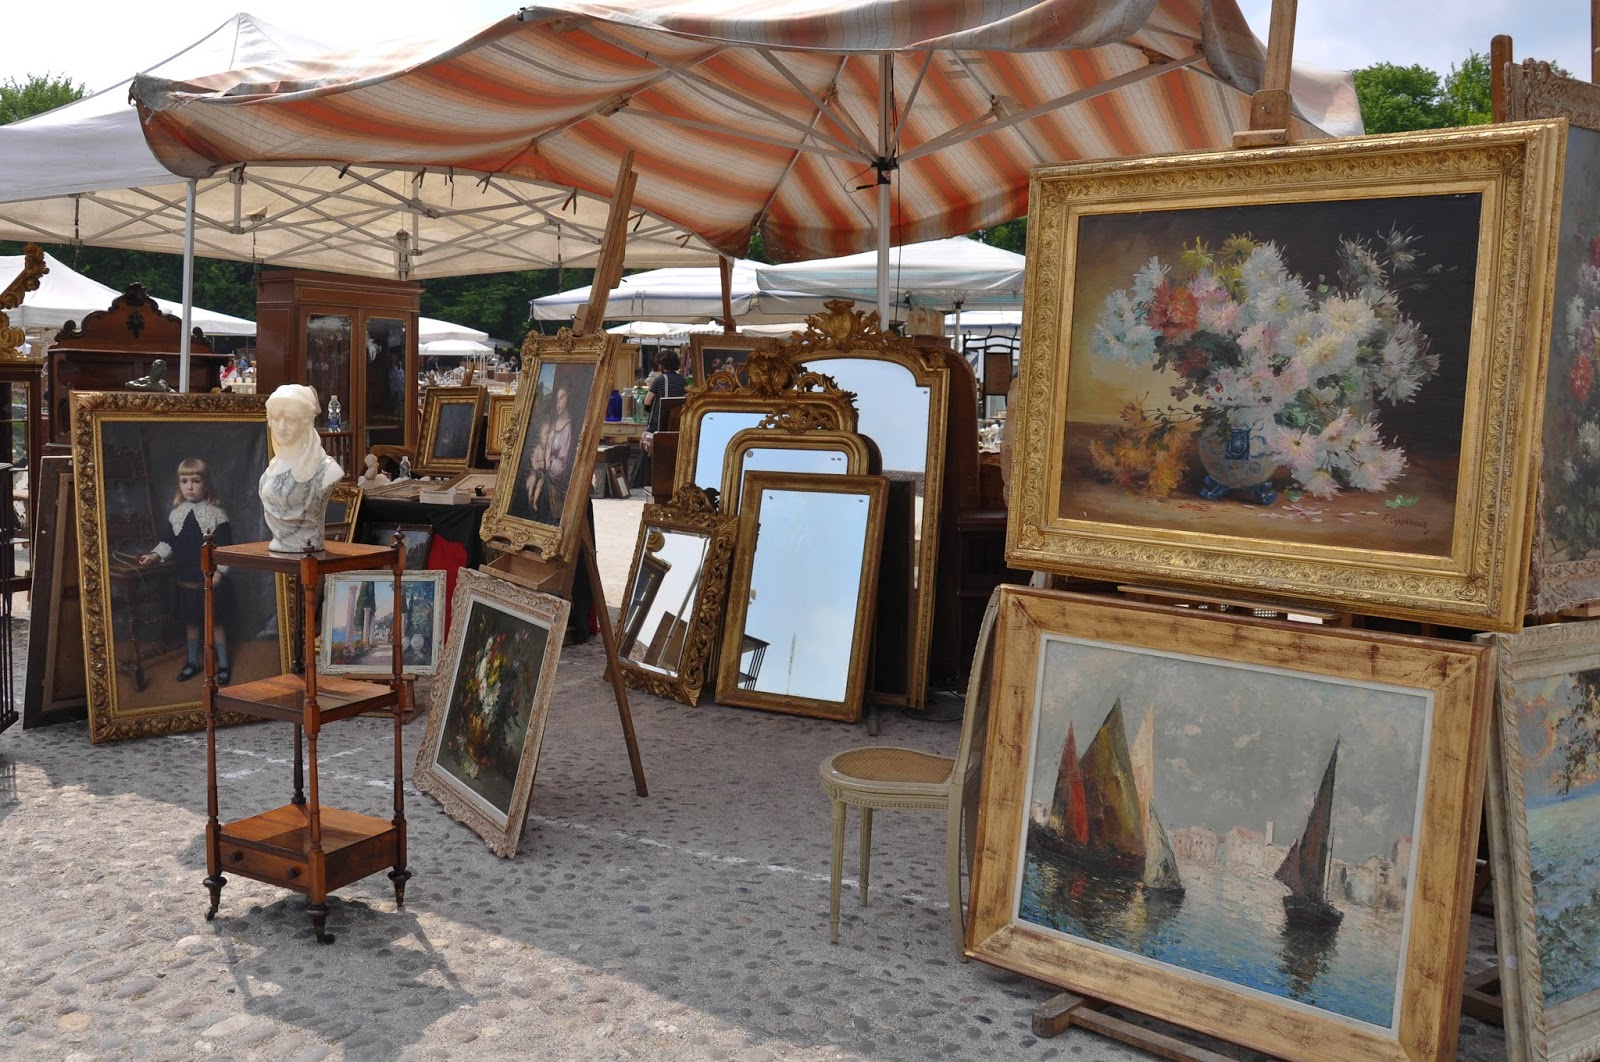 Stall with paintings at the antiques market in Piazzola sul Brenta, Veneto, Italy